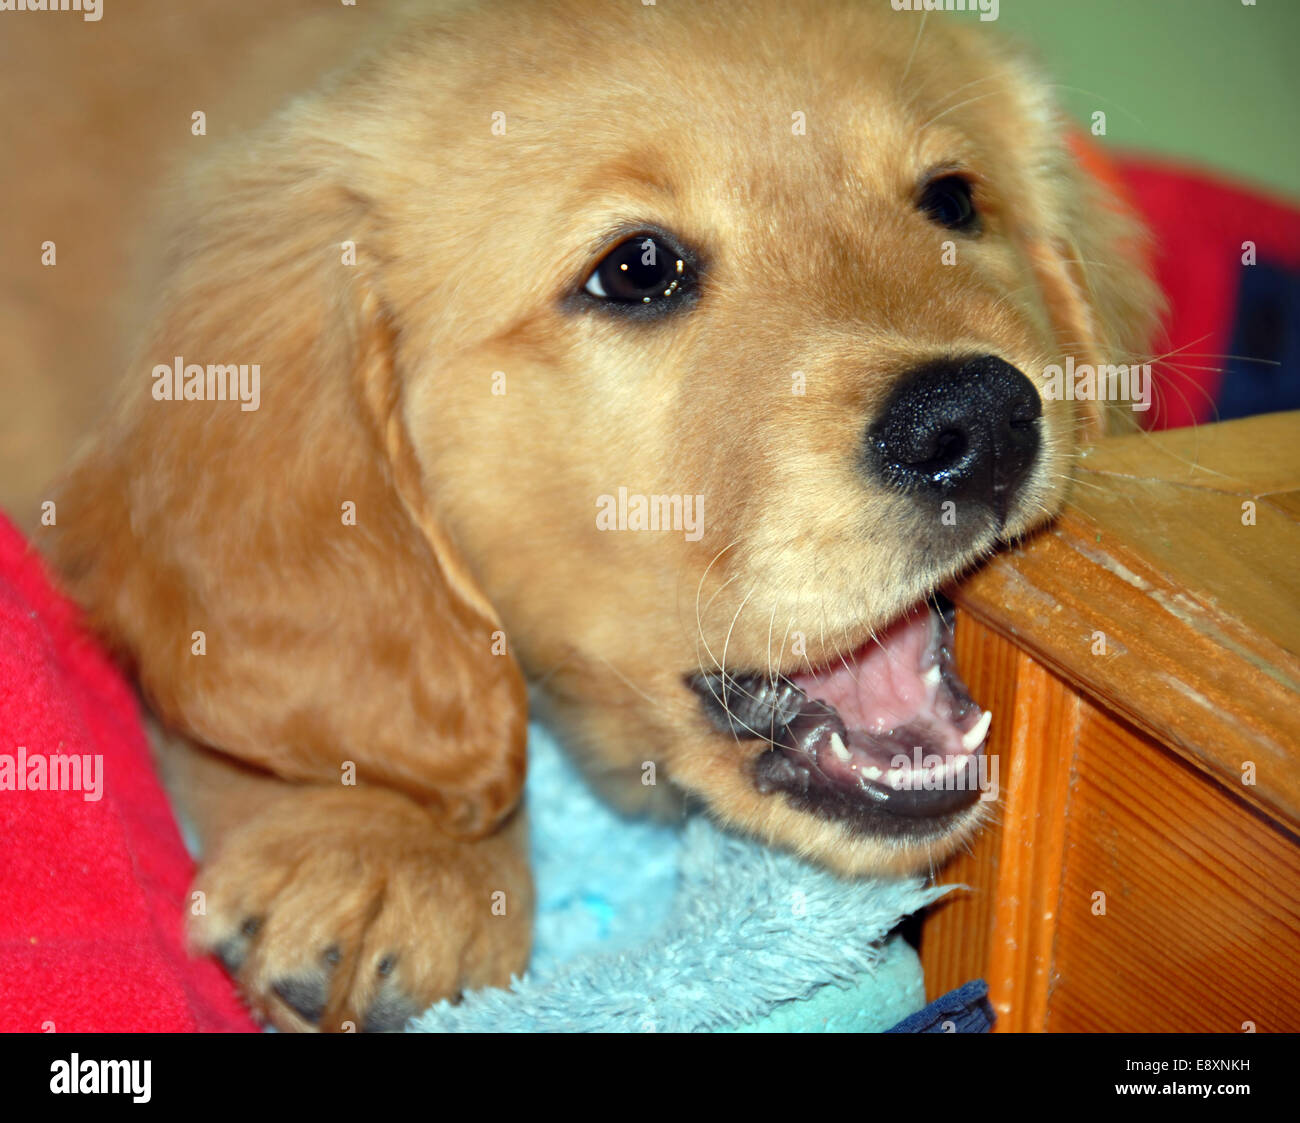 Dog gnawing wooden step Stock Photo